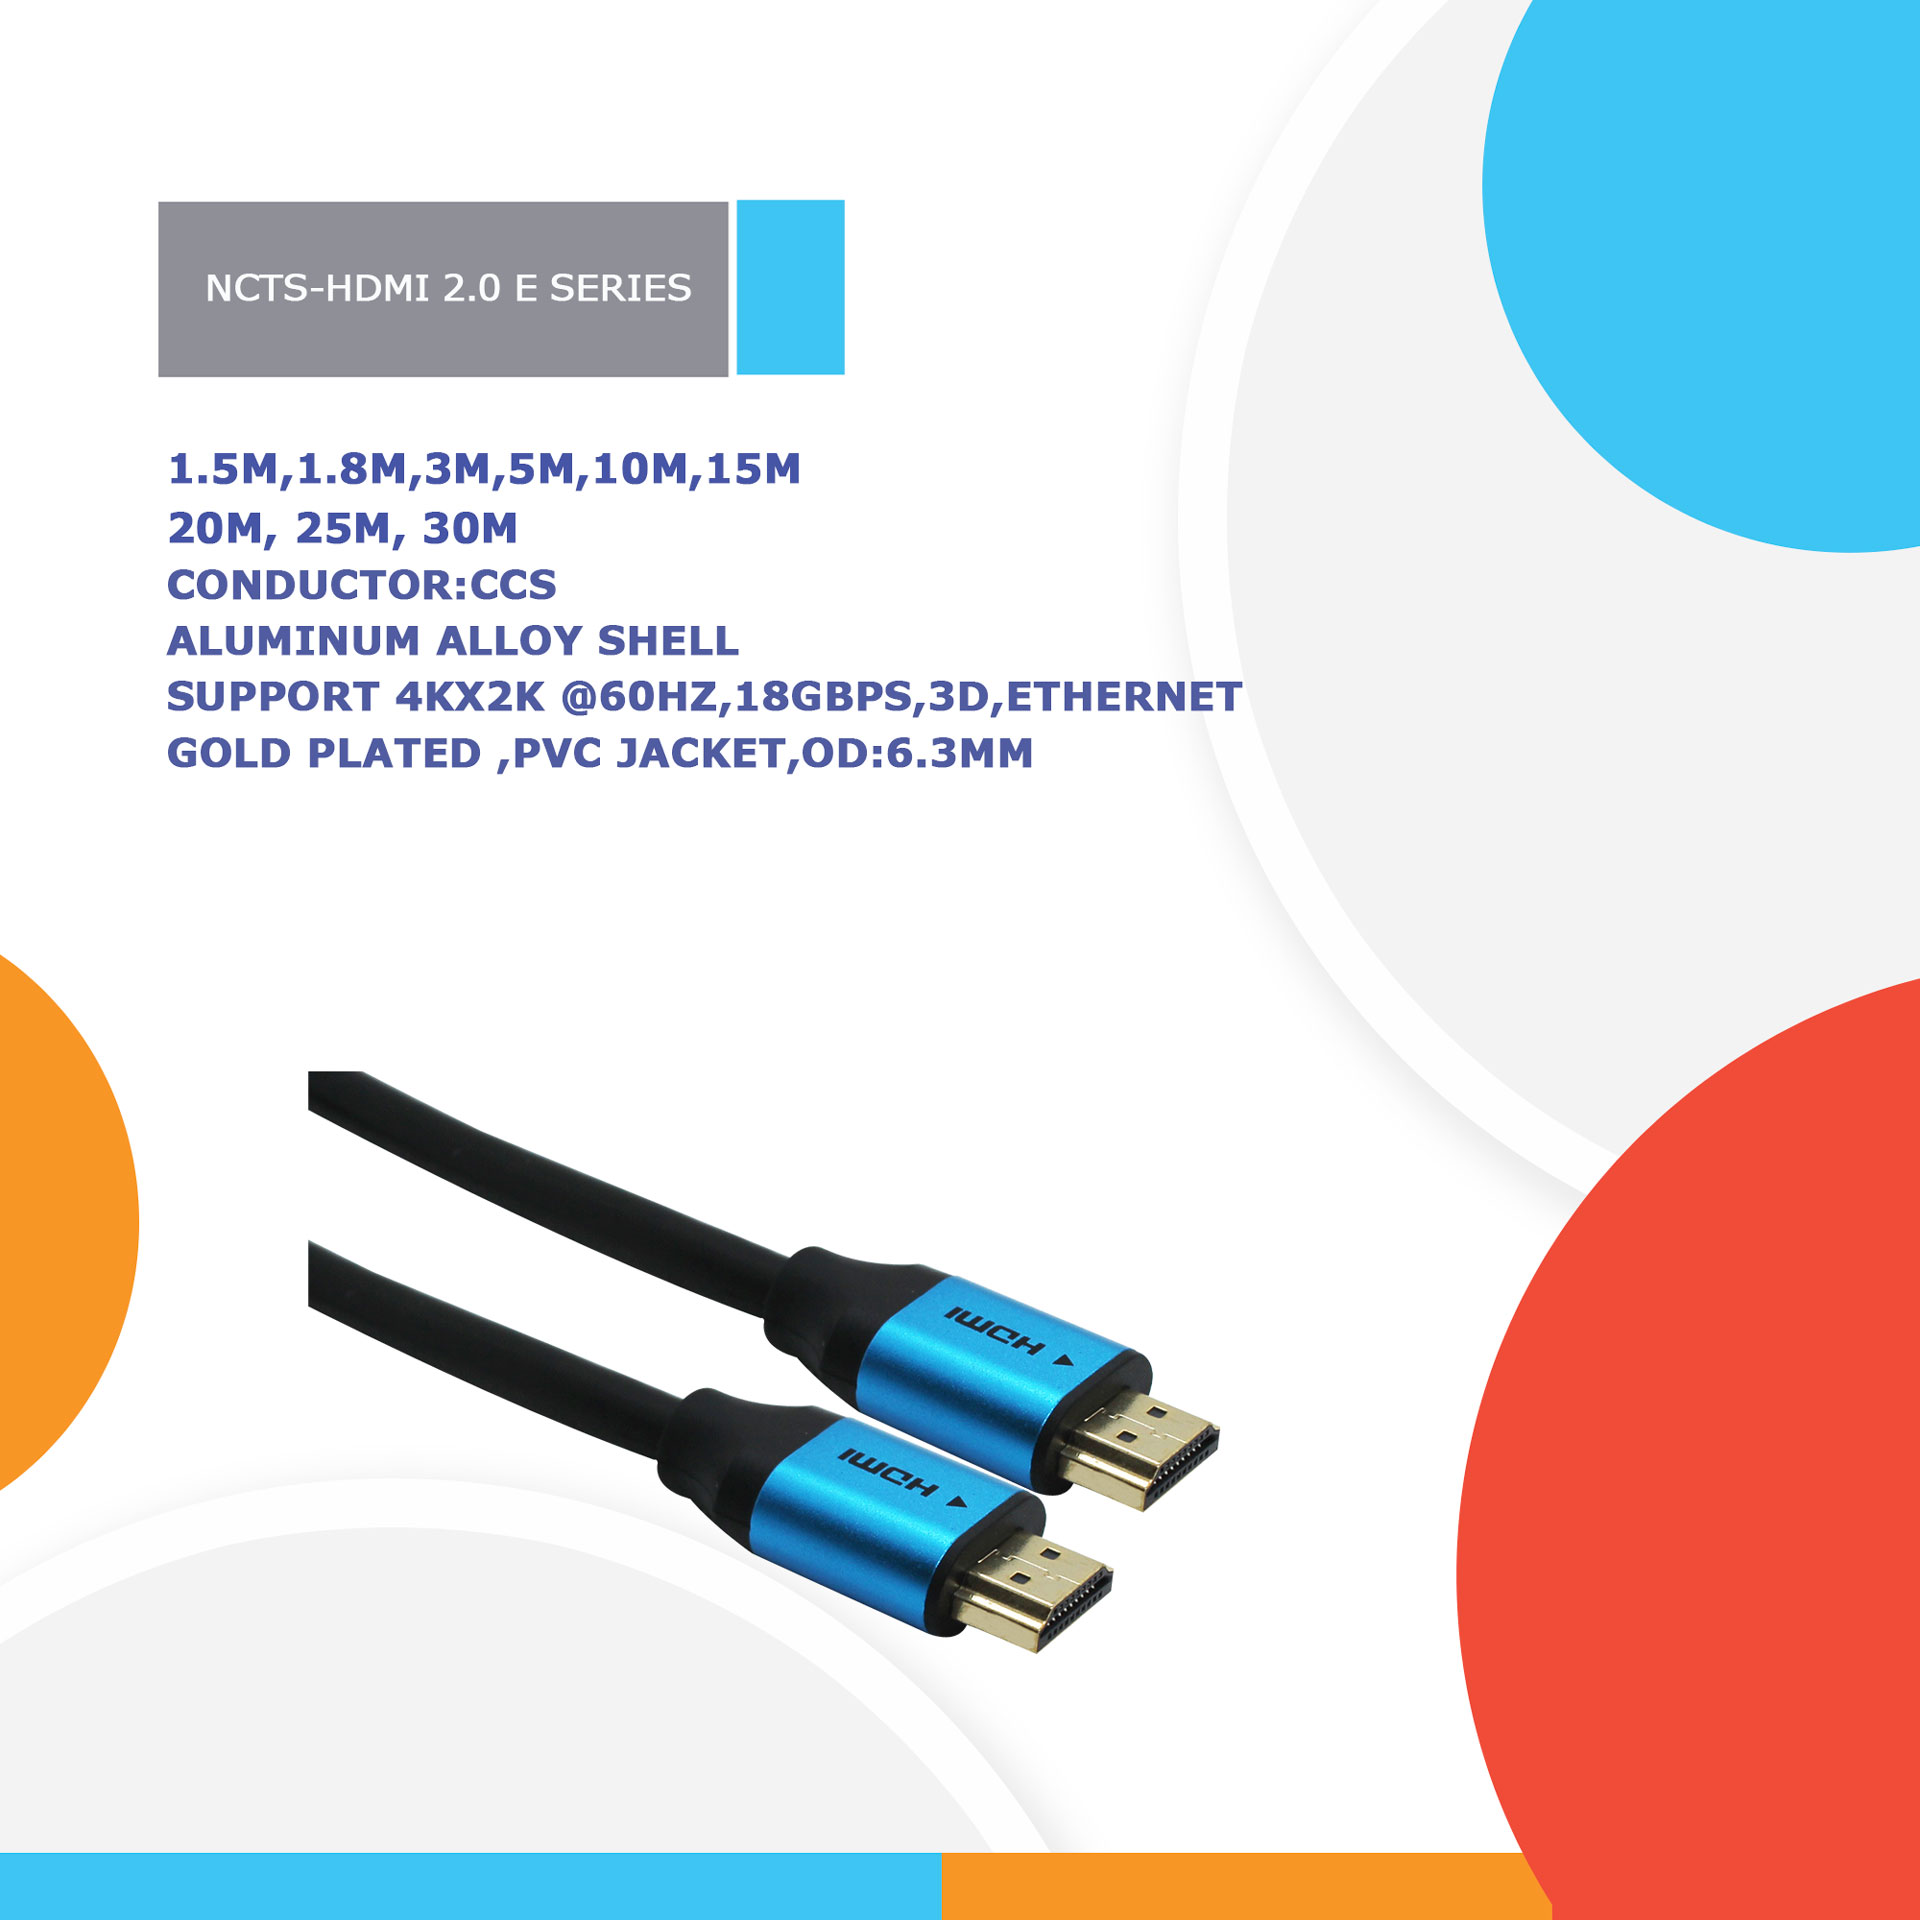 NCTS HDMI 2.0 E SERIES